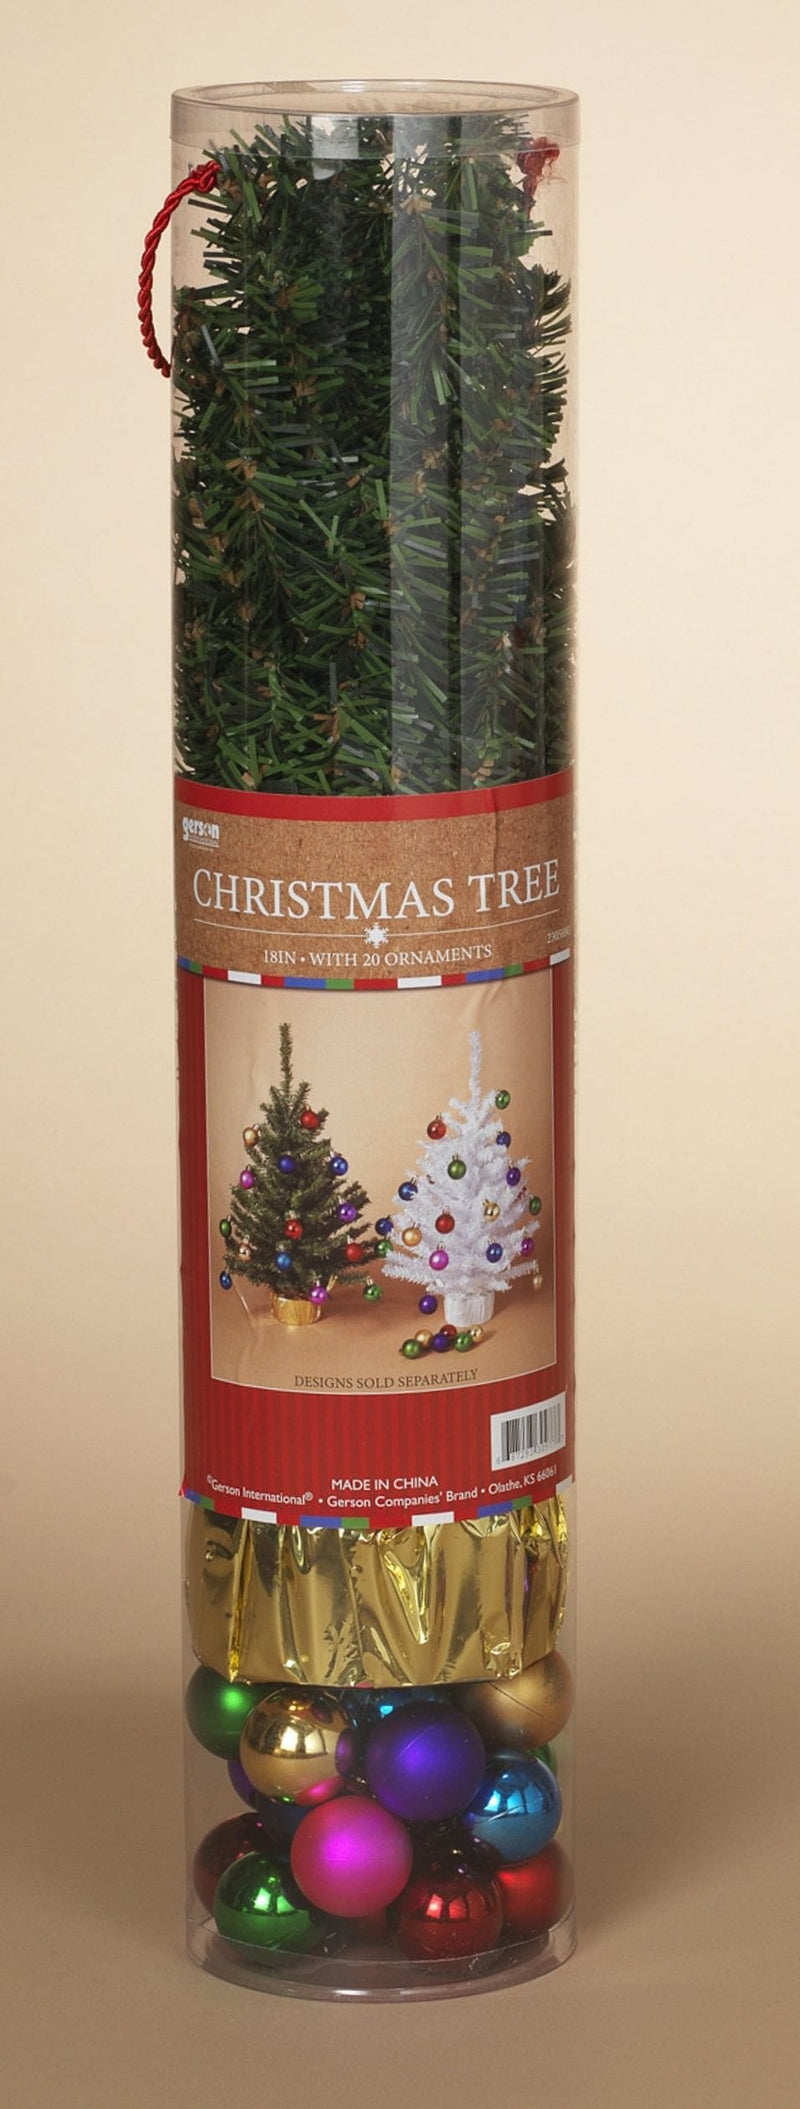 18 Inch Christmas Tree with 20 Ornaments - Green - Shelburne Country Store